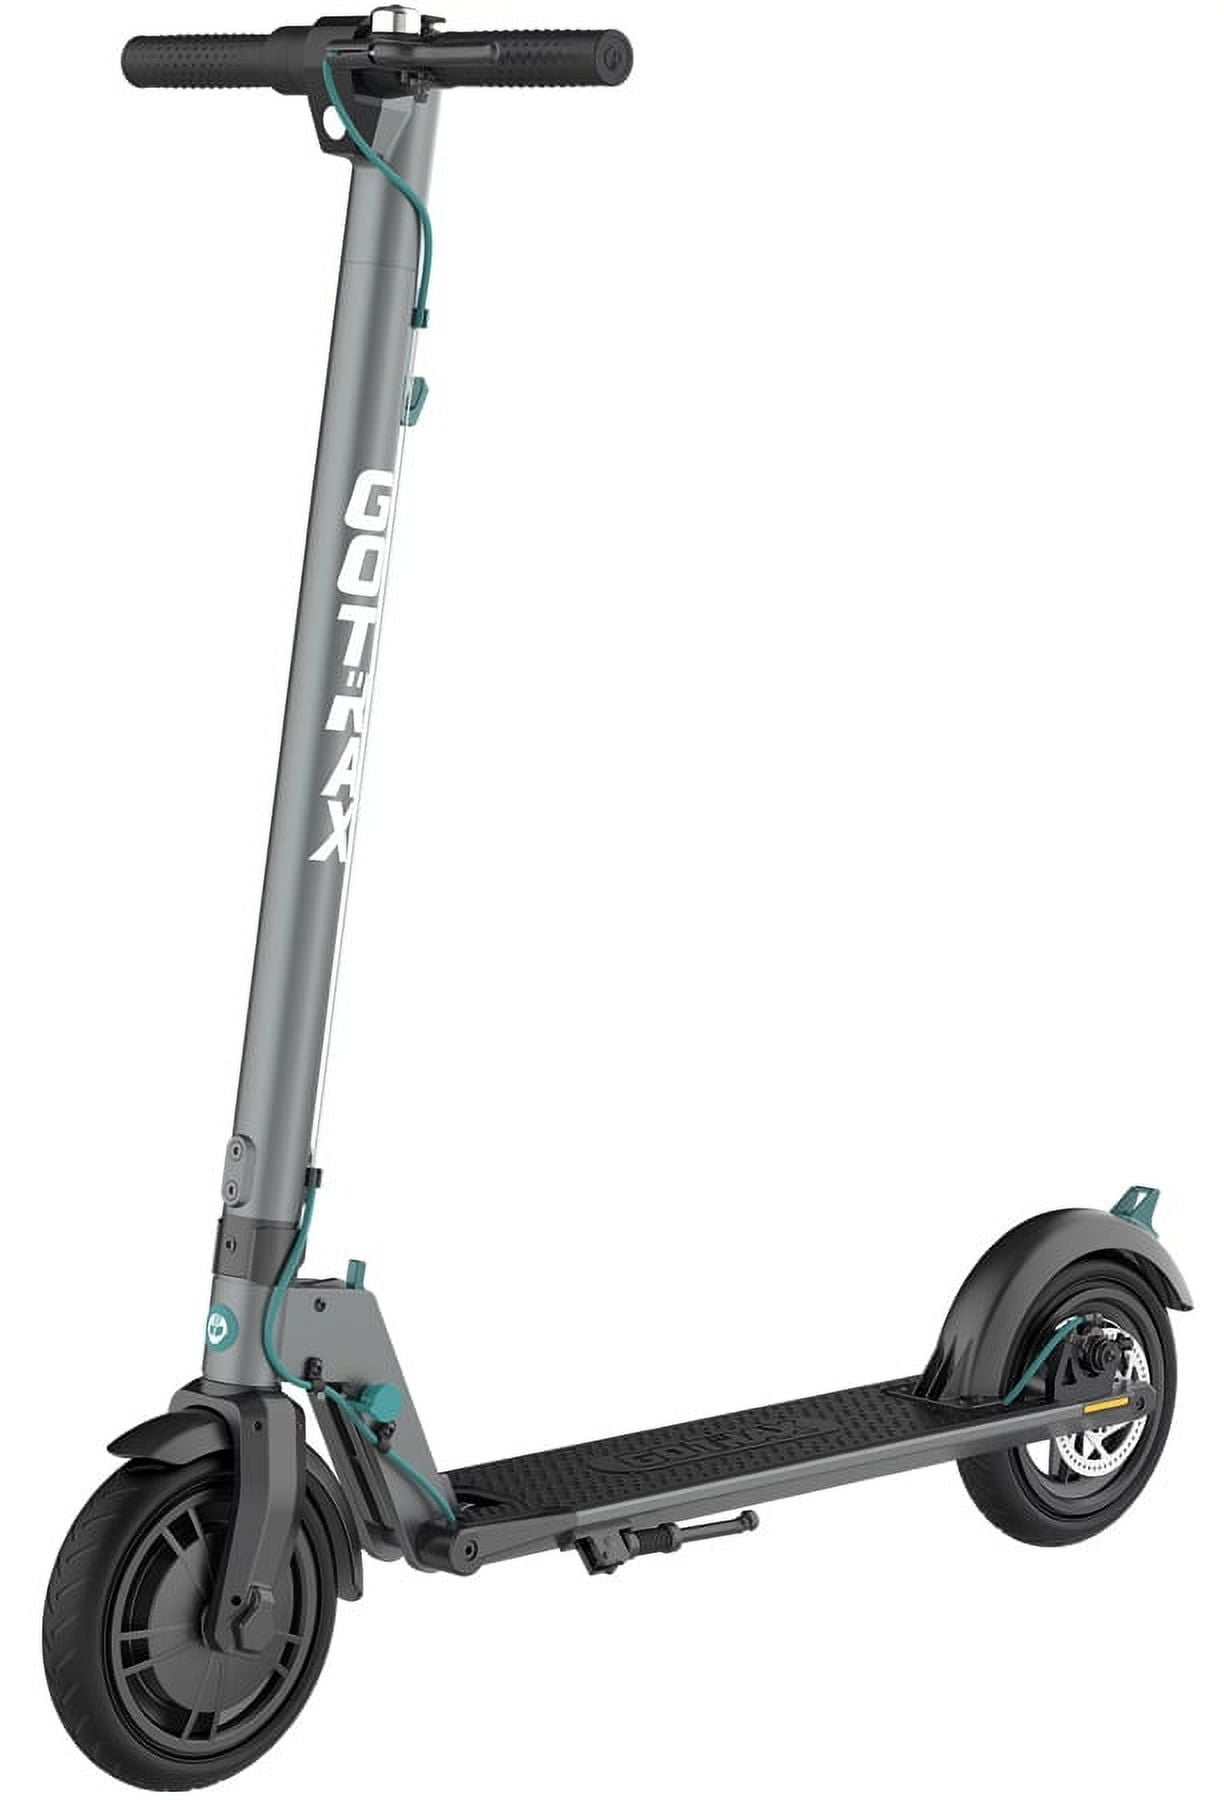 Gotrax Rival Adult Electric Scooter, 8.5 inch Pneumatic Tire, Max 12 Mile Range and 15.5mph Speed, 250W Foldable Escooter for Adult, Gray